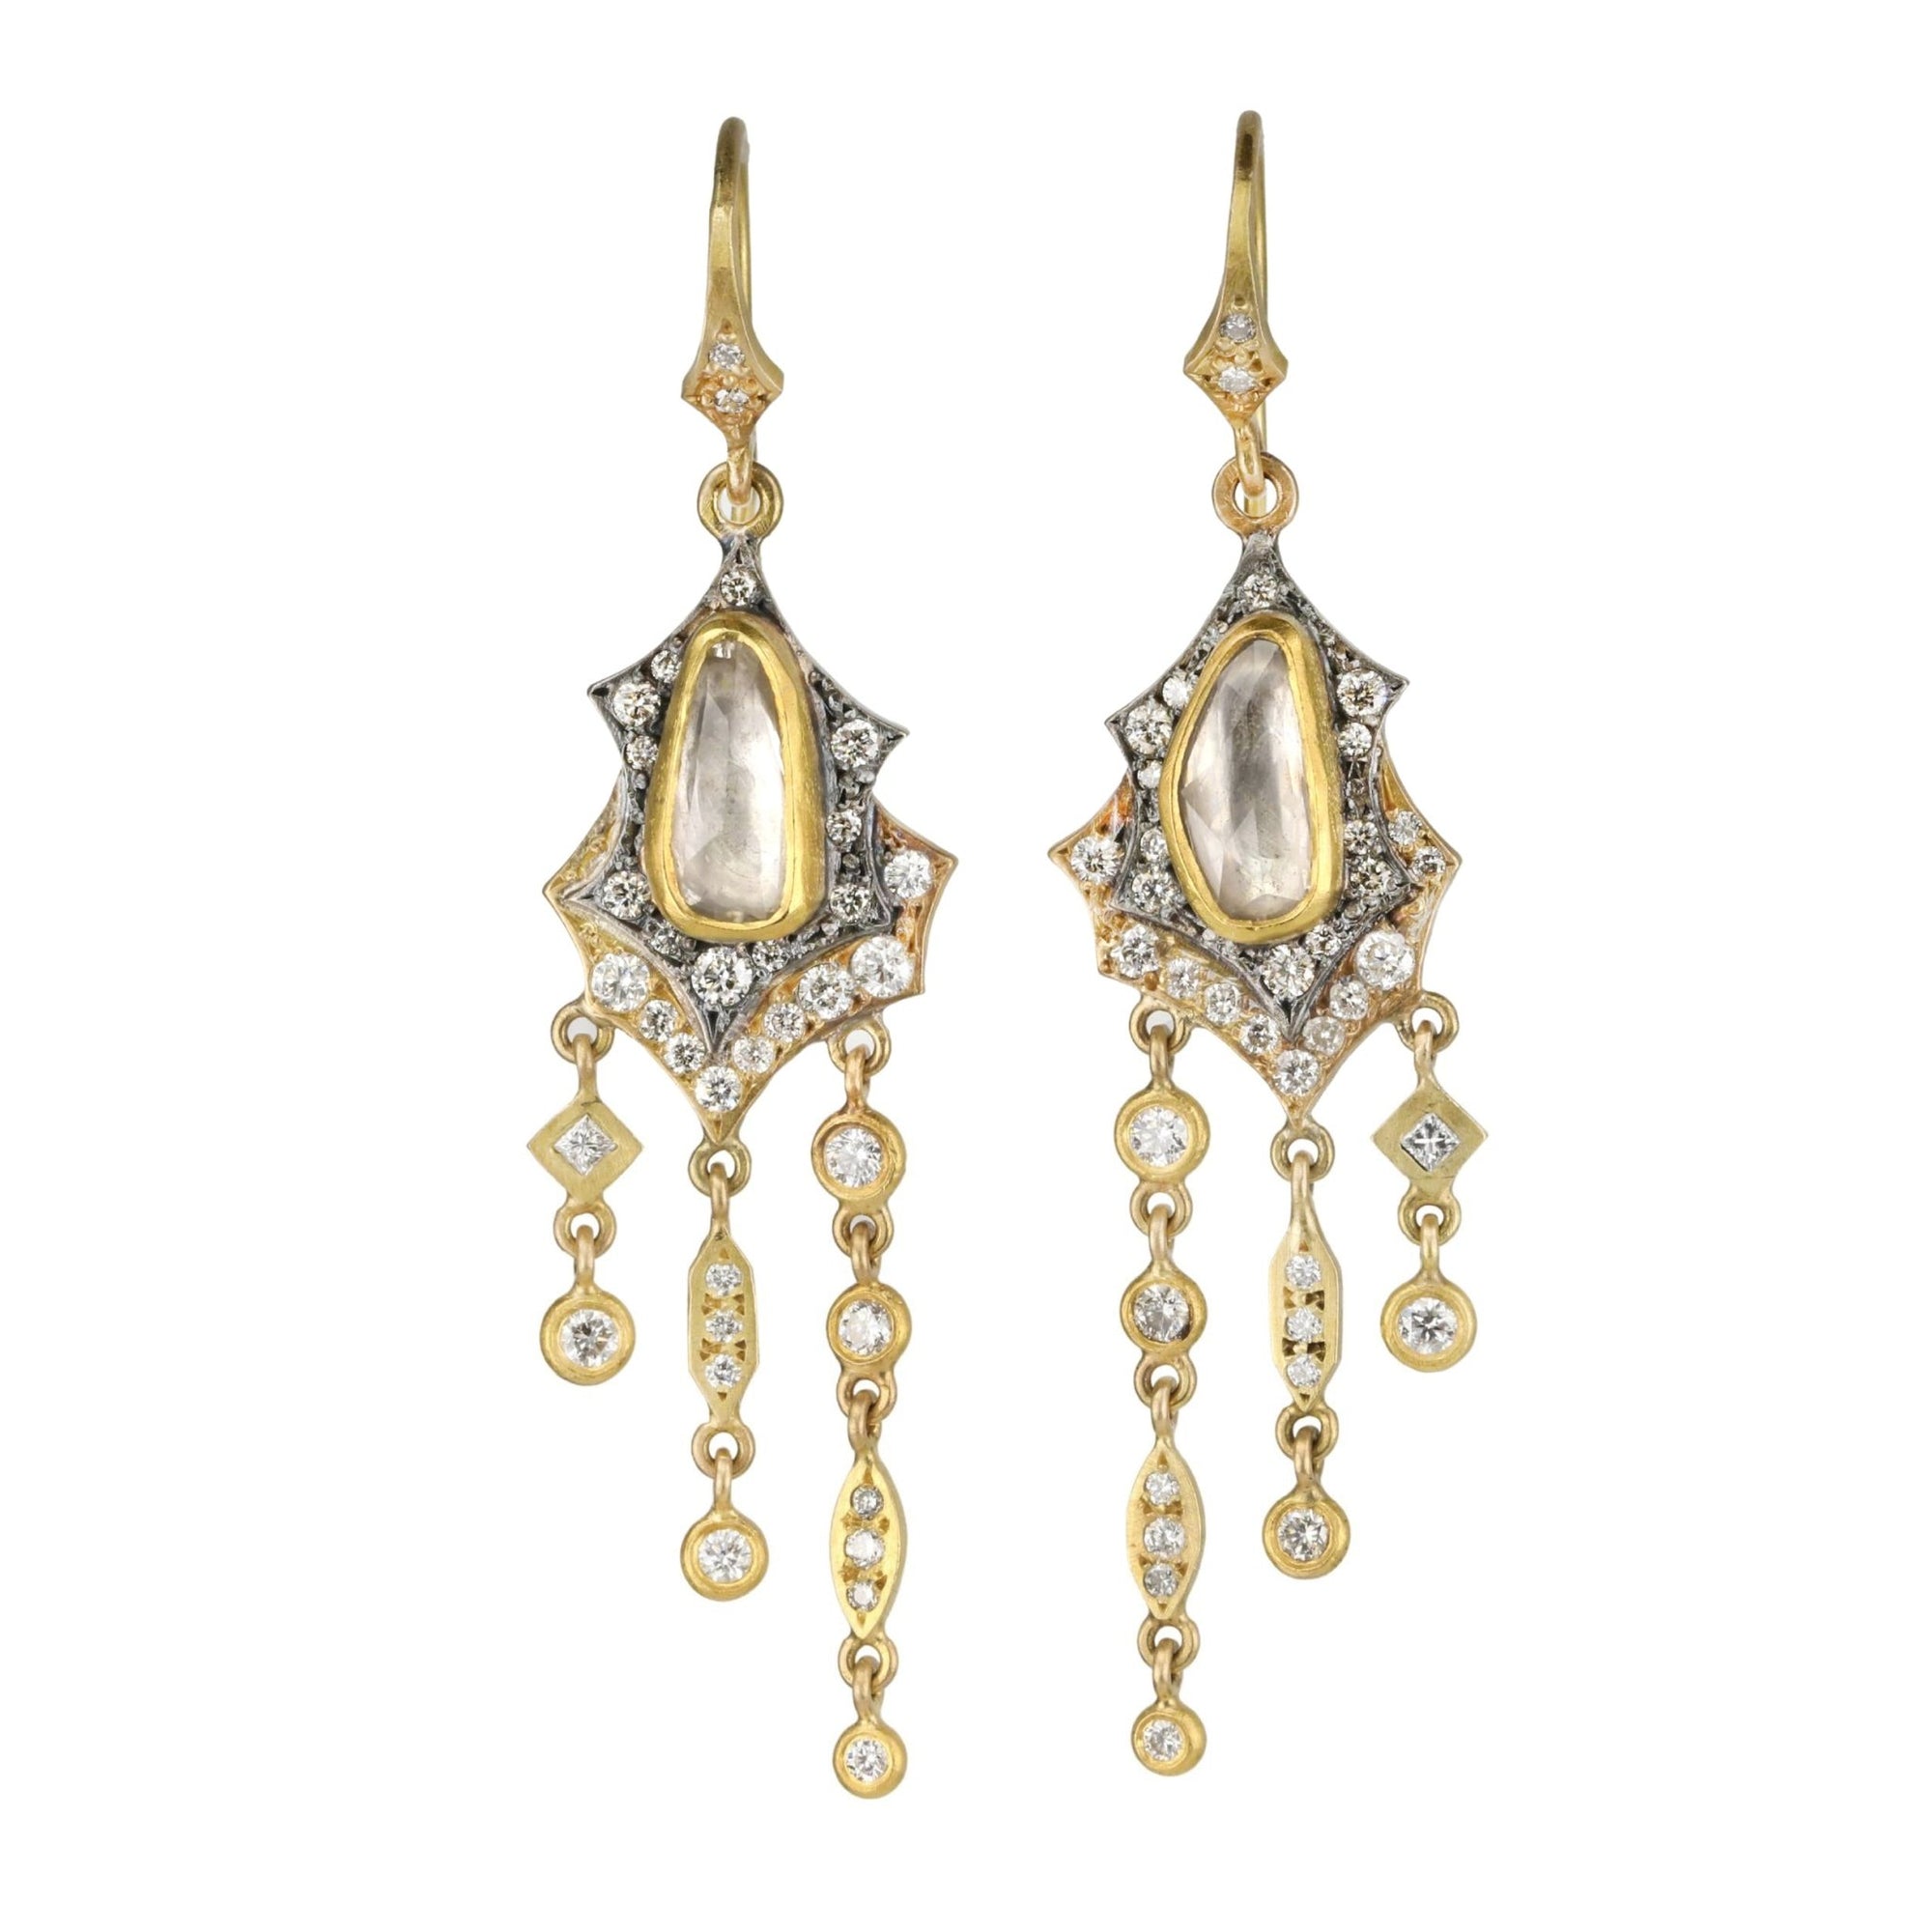 Annie Fensterstock 22K Yellow Gold and 18K White Gold Double Scallop Earrings with White Sapphires